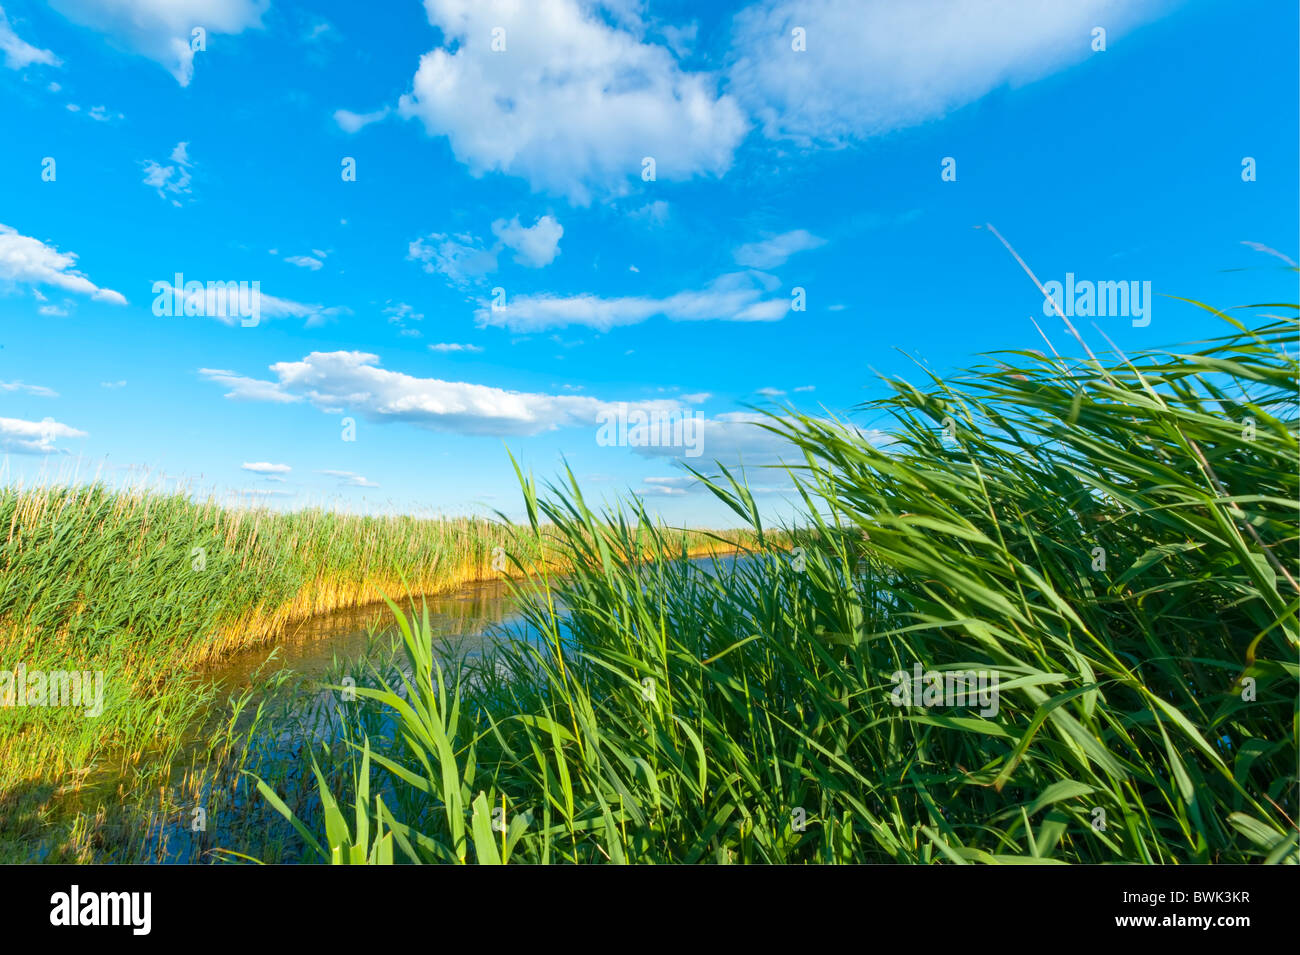 Marsh Reeds Blowing in Wind, near and far perspective, at Pond, Summer in marshland of Merrick, New York Stock Photo